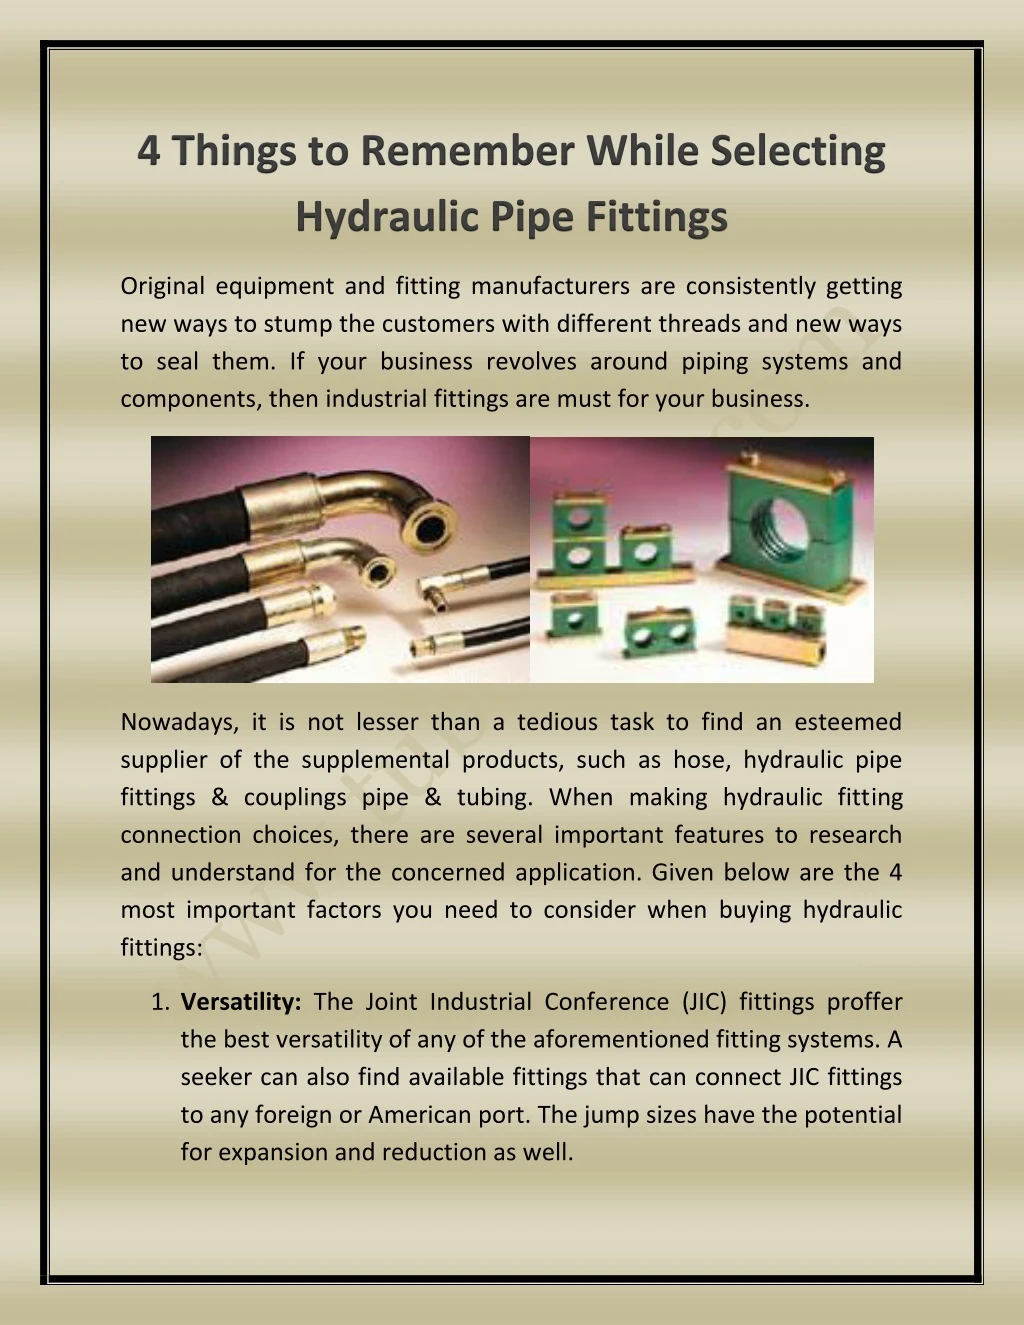 4 things to remember while selecting hydraulic